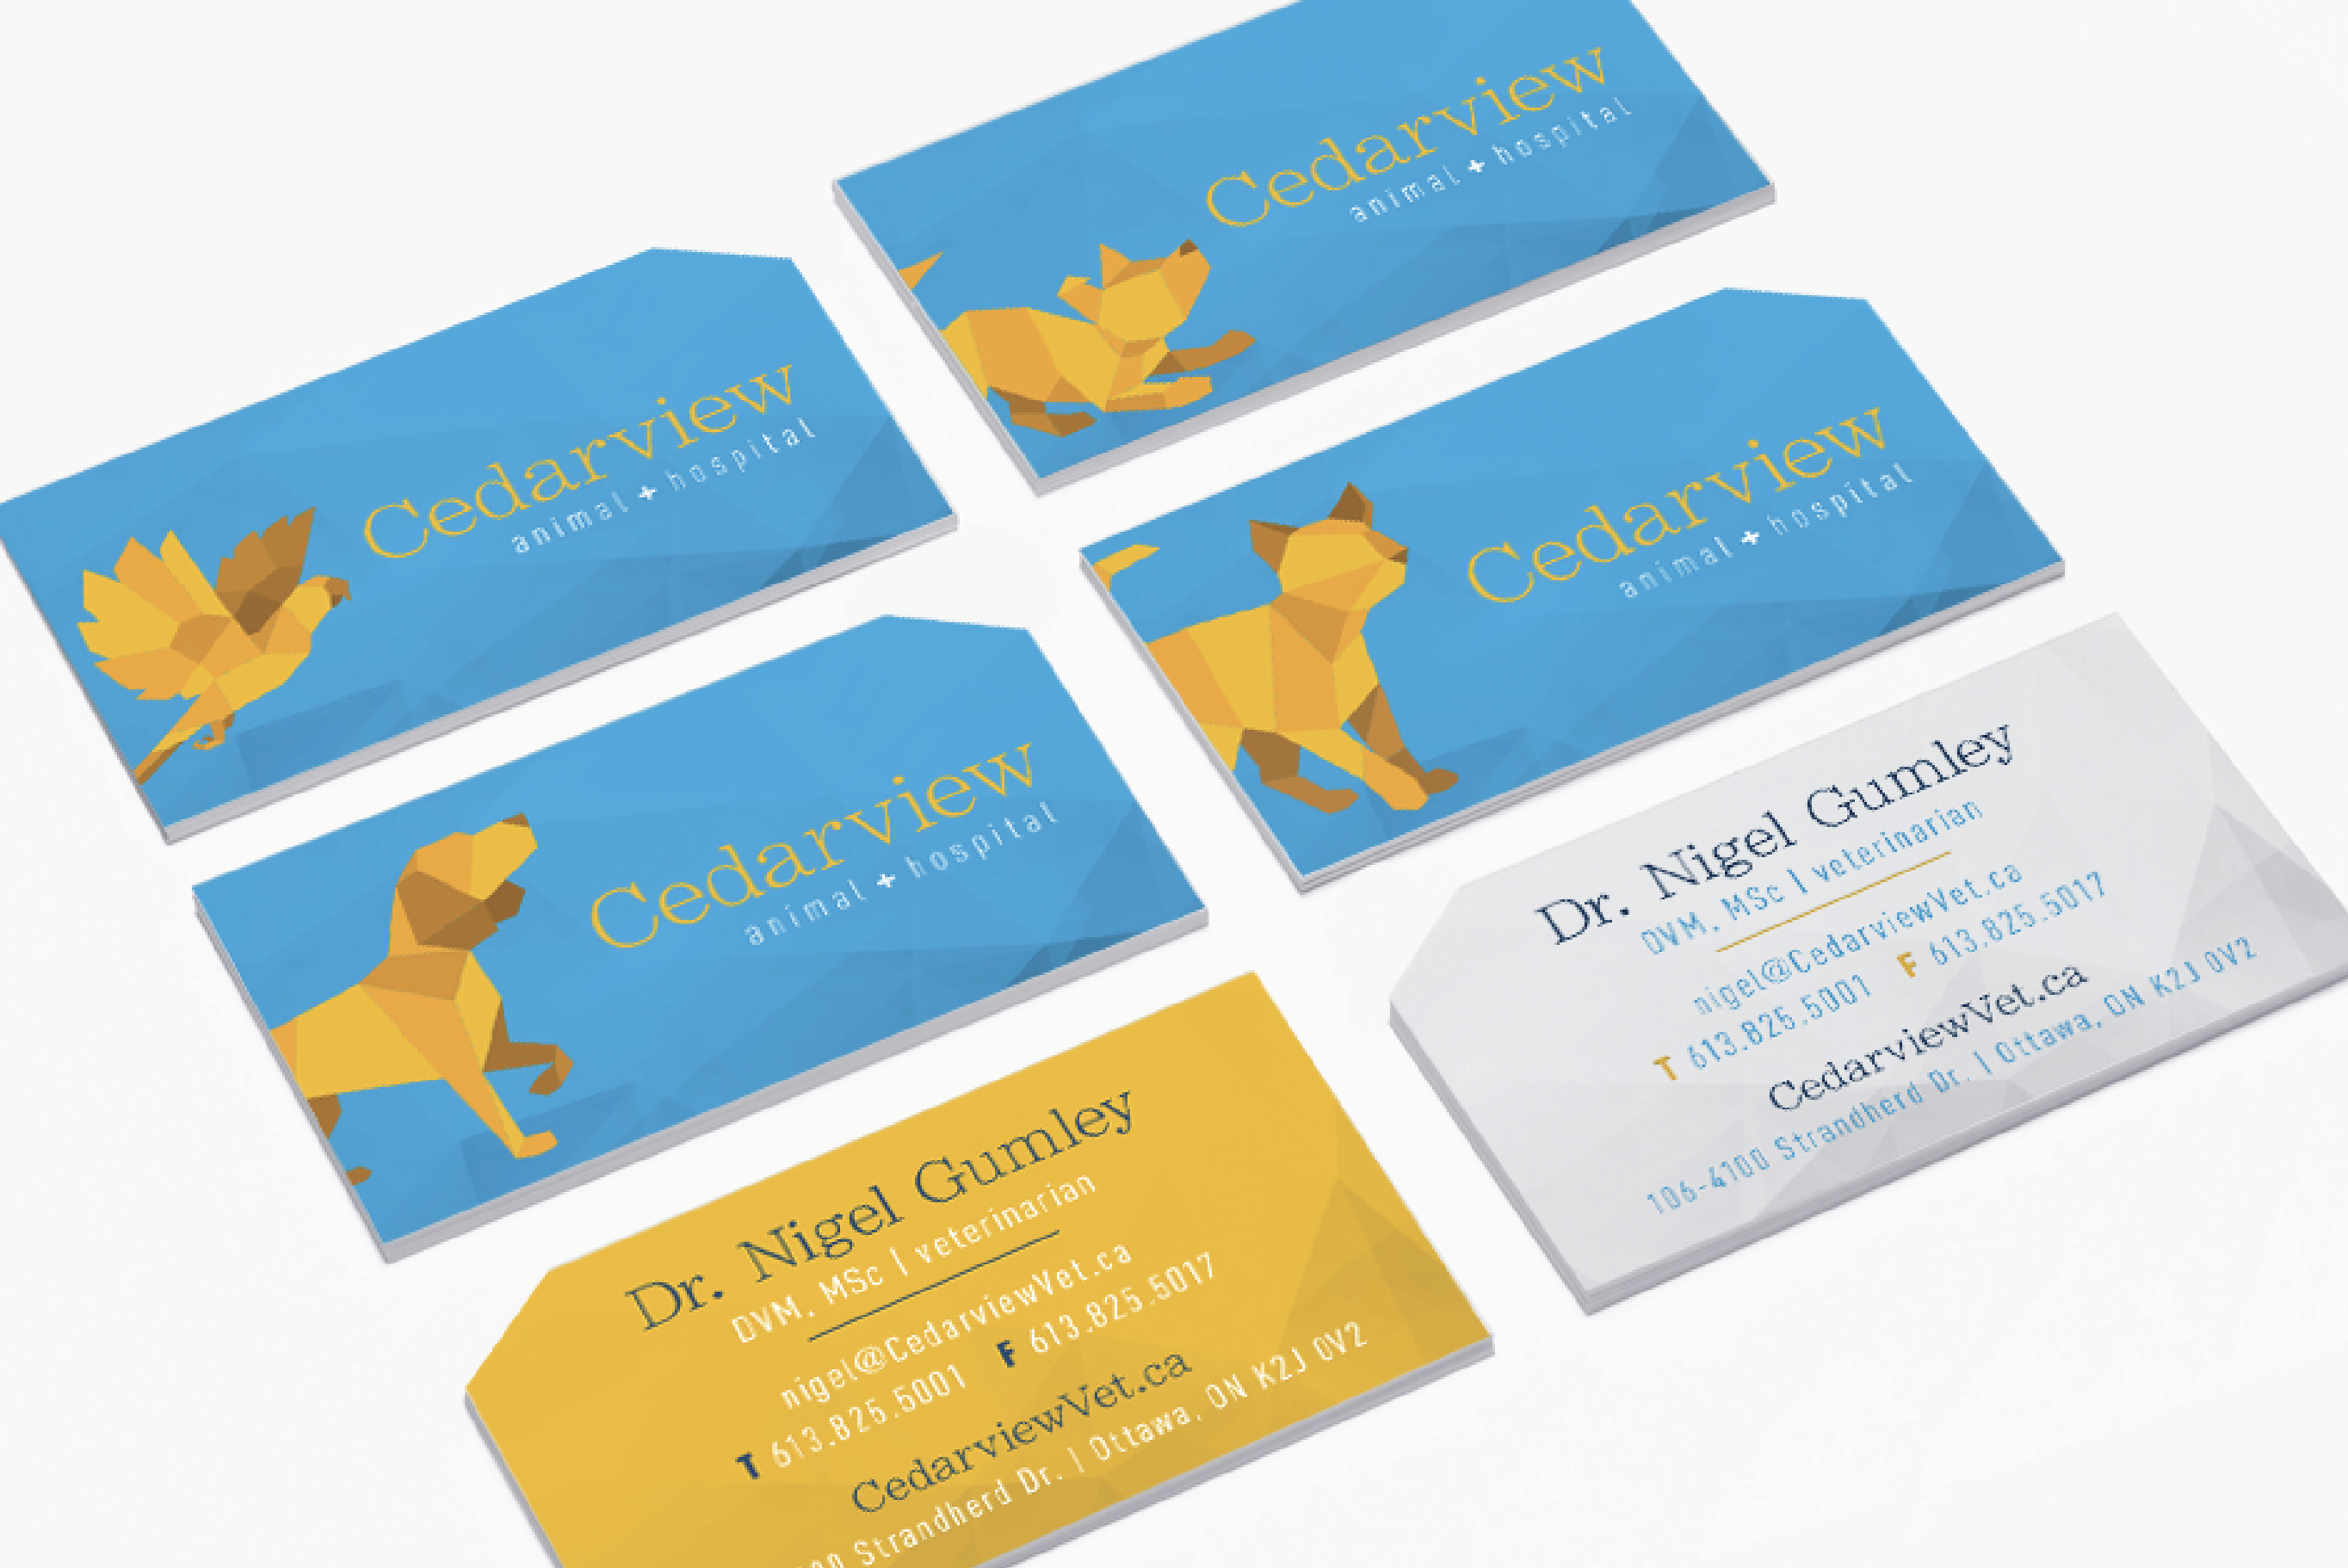 Cederview Animal Hospital business card | Brand communication tools